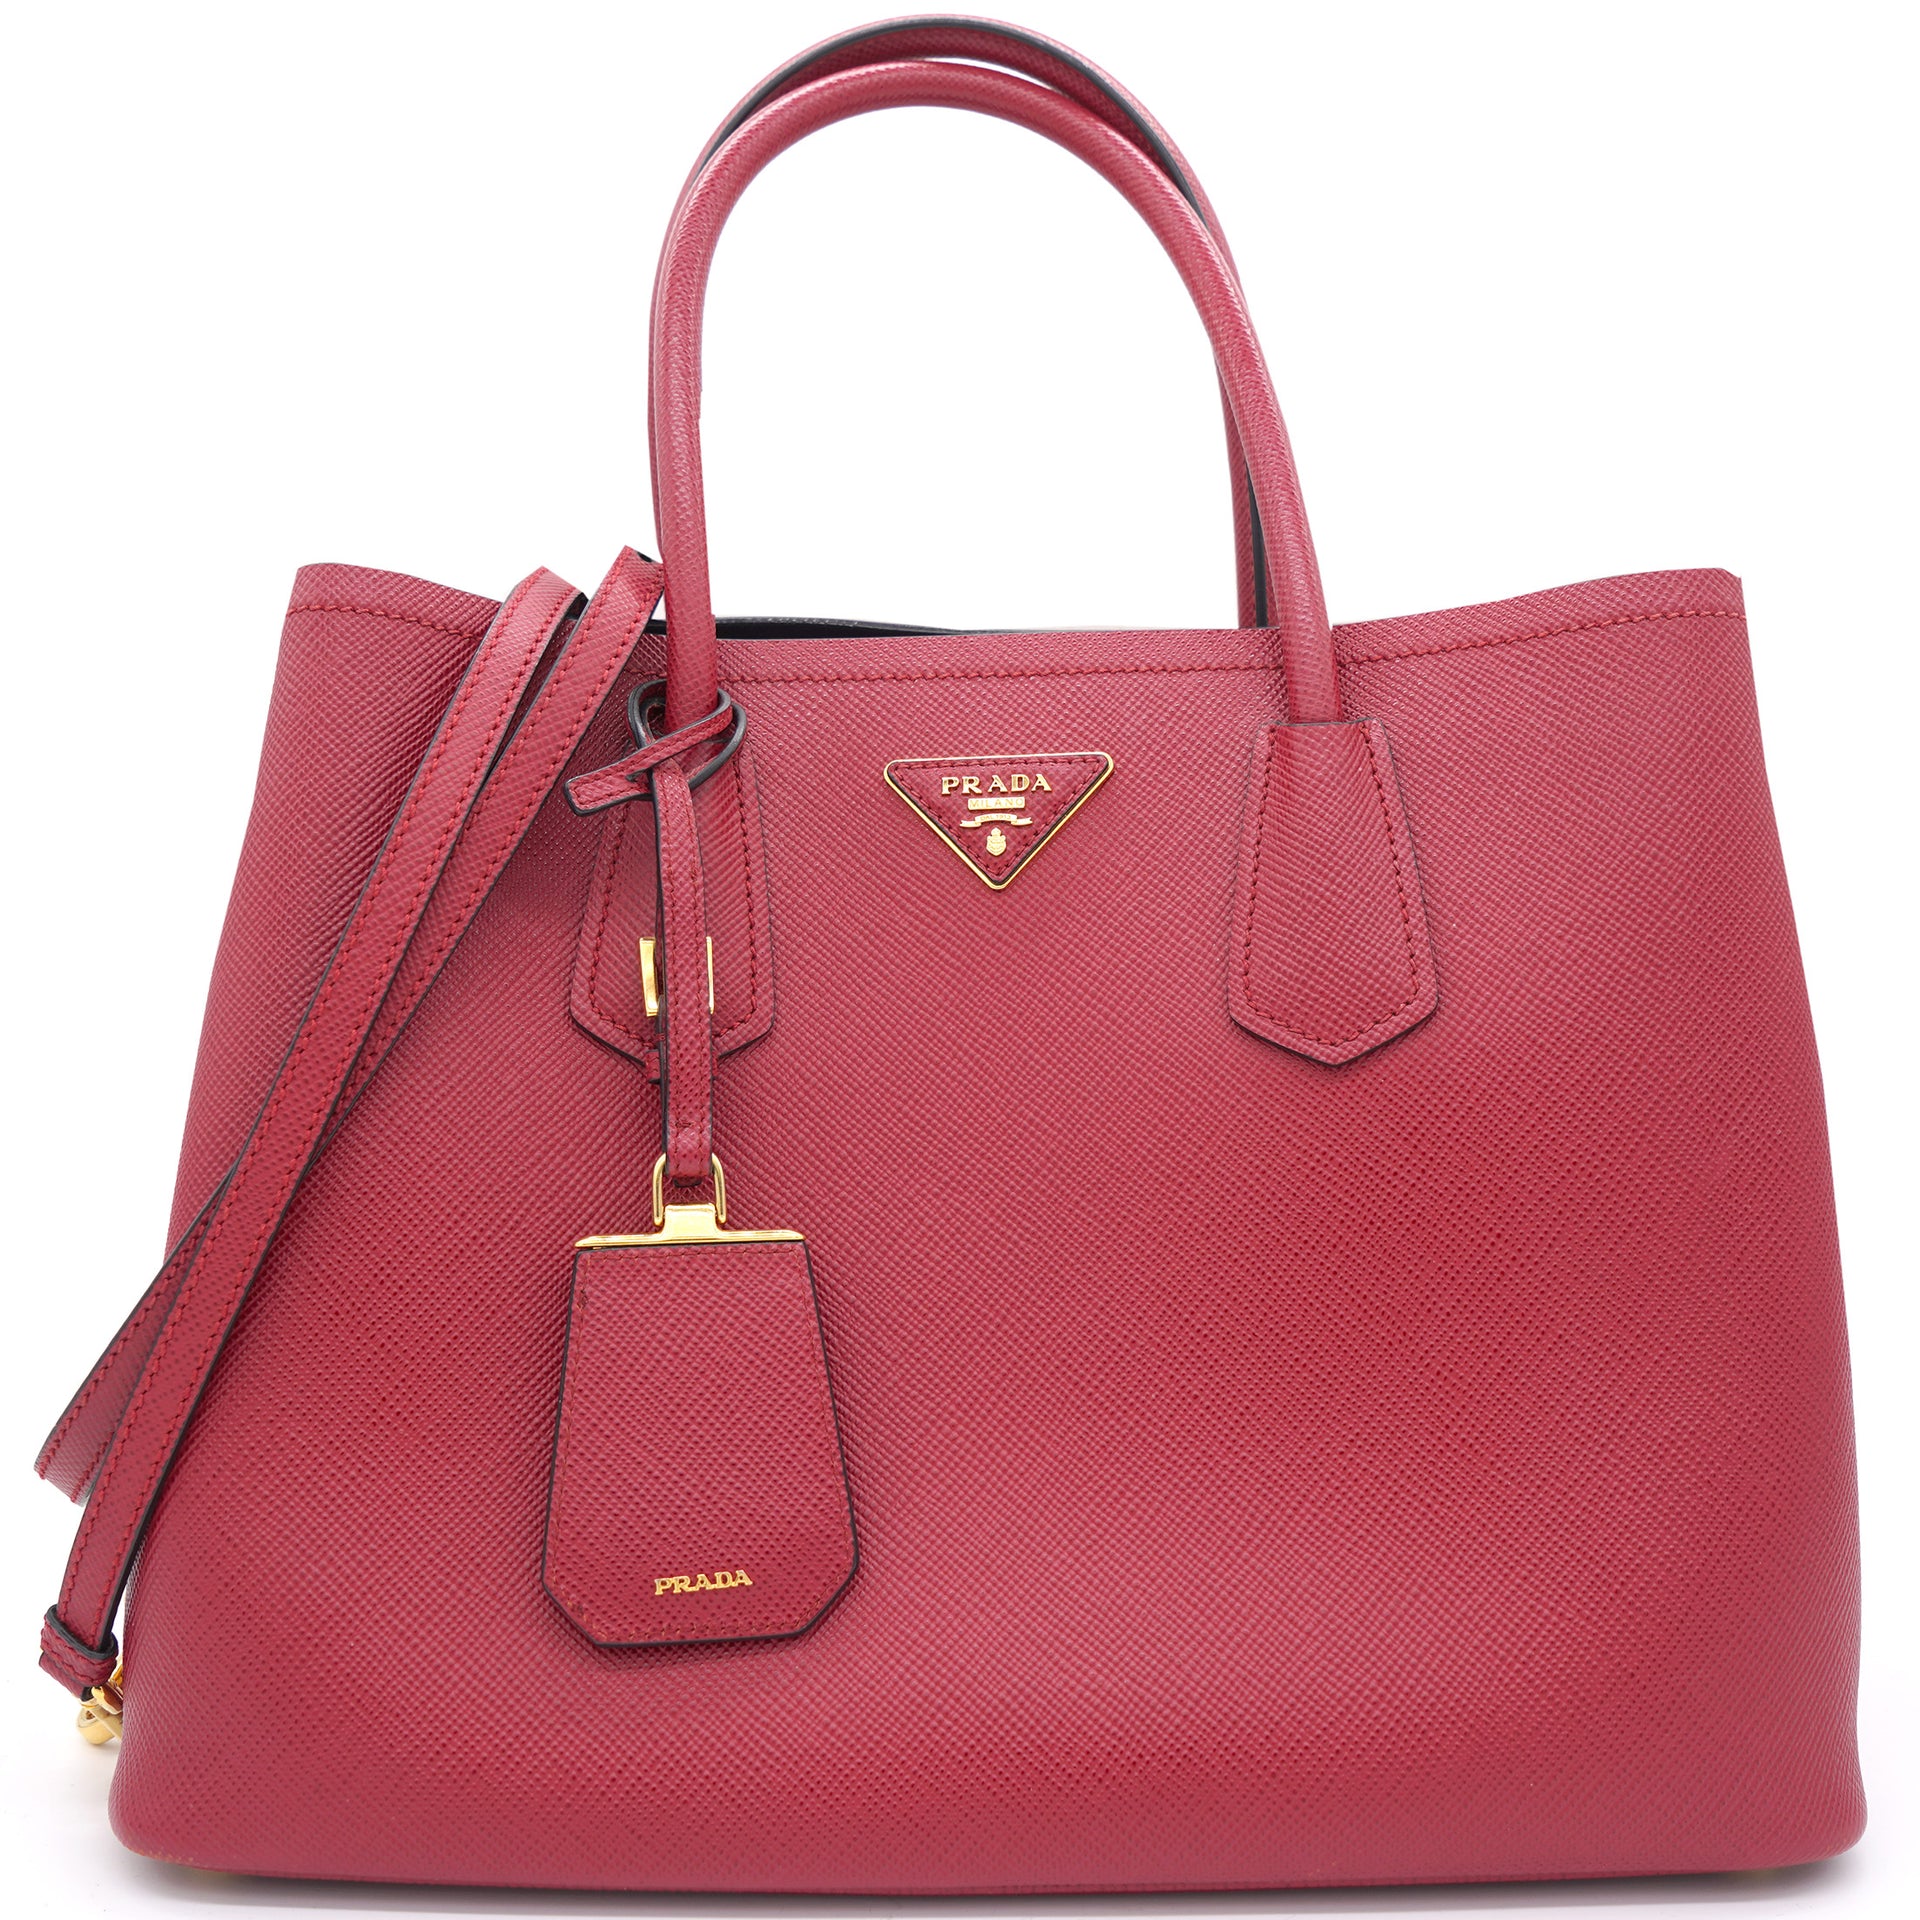 Medium Red Saffiano Leather Double Top Handle Bag